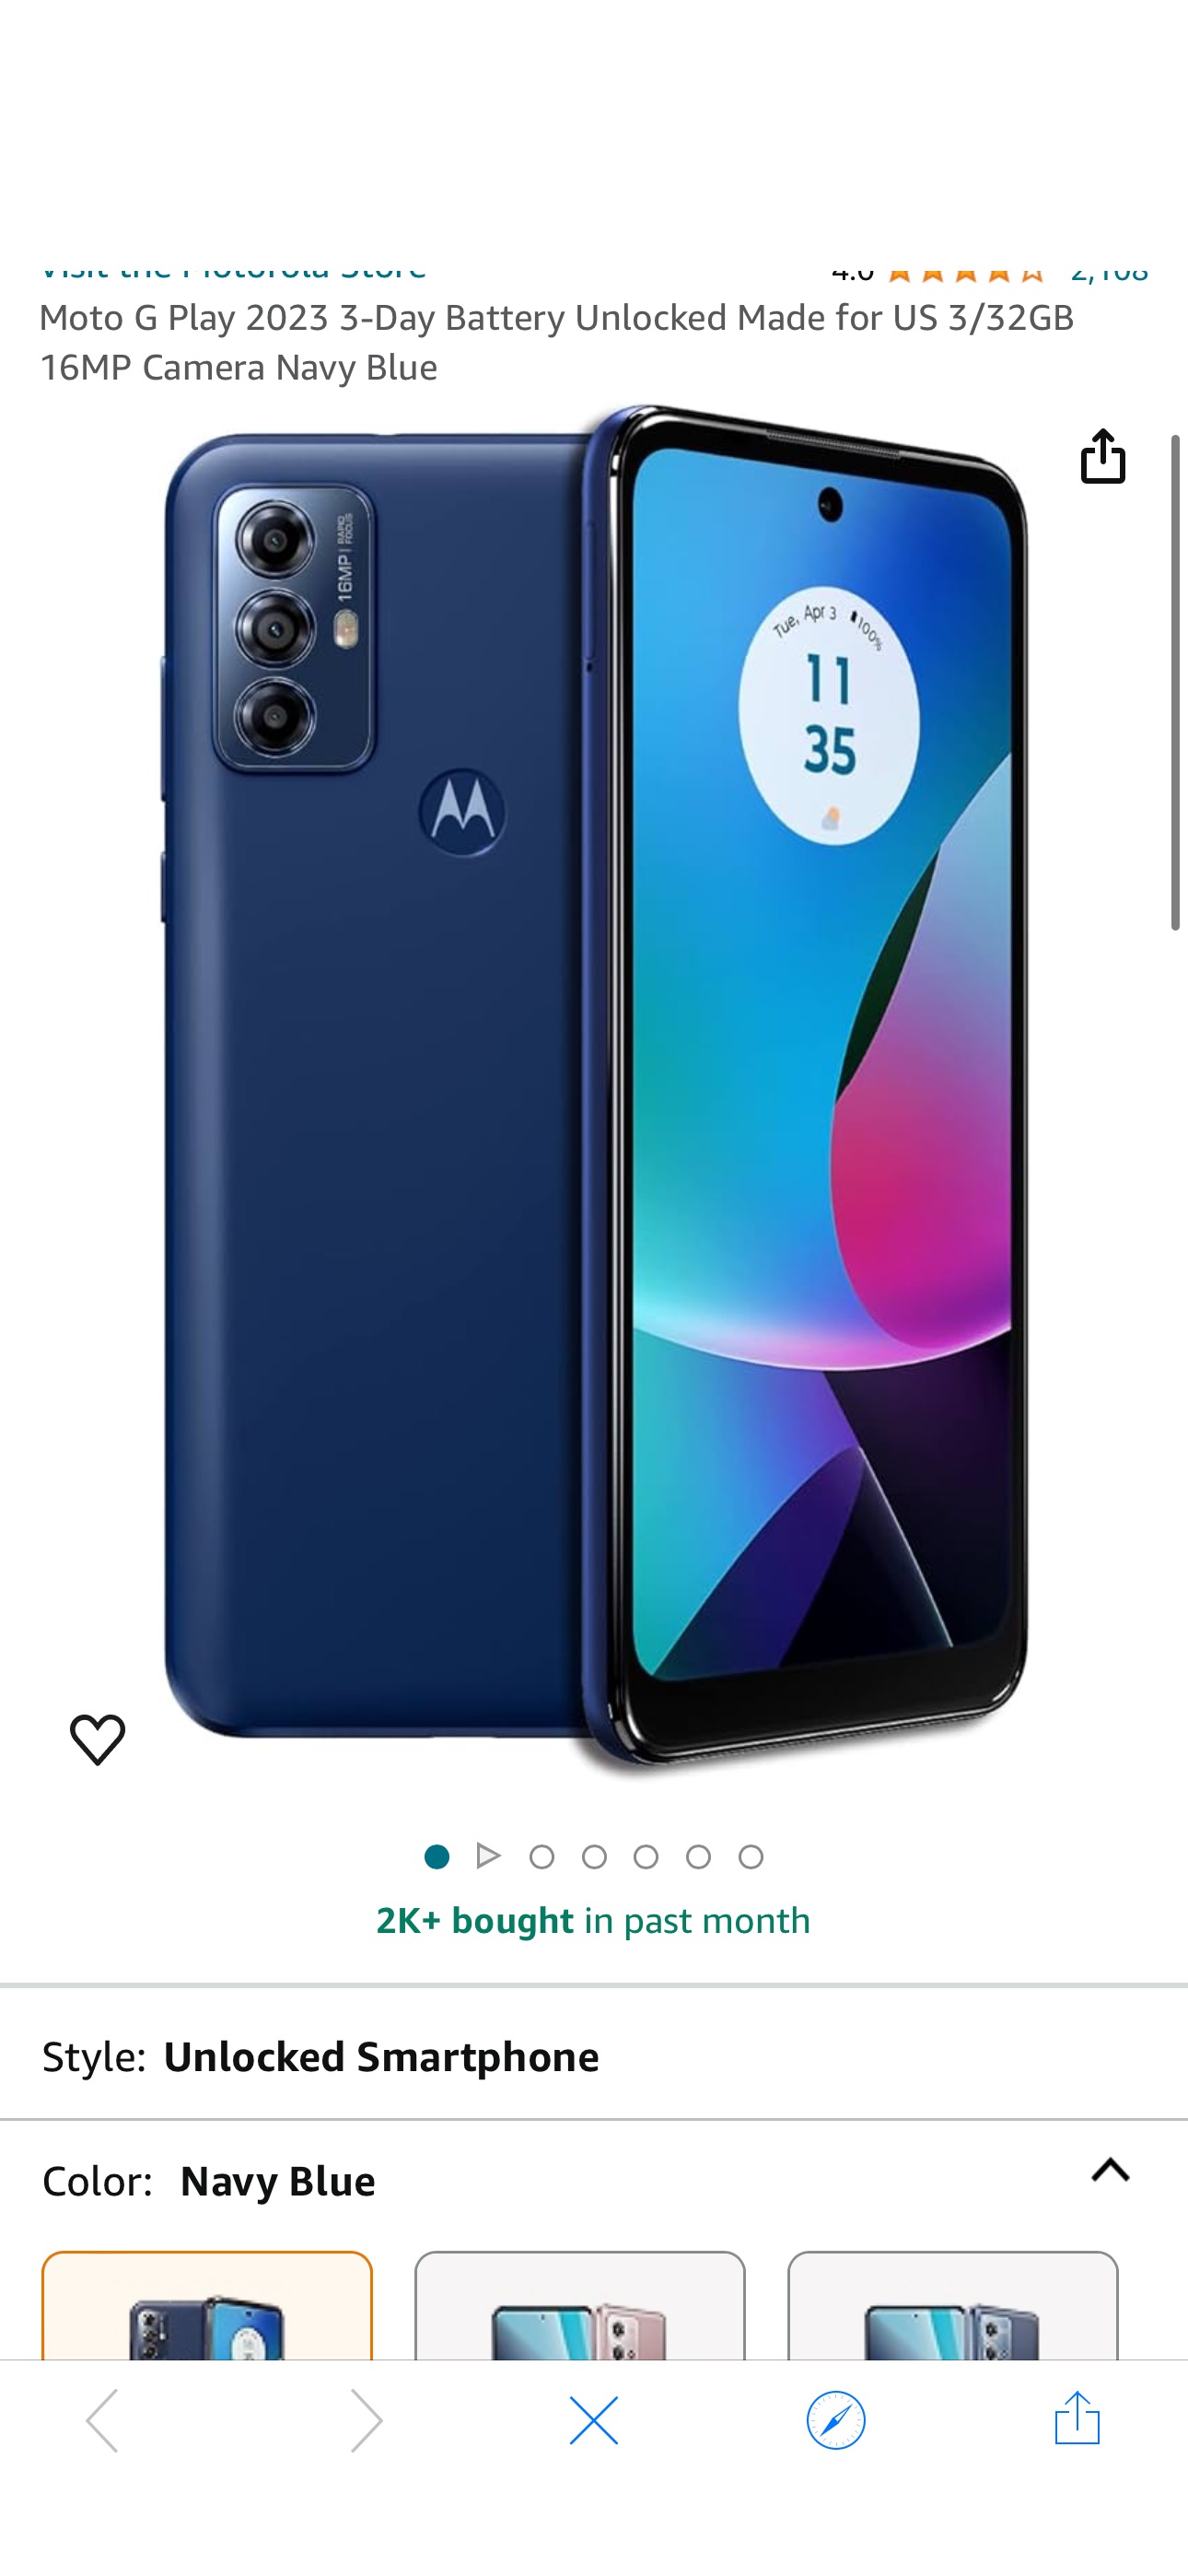 Amazon.com: Moto G Play 2023 3-Day Battery Unlocked Made for US 3/32GB 16MP Camera Navy Blue : Cell Phones & Accessories